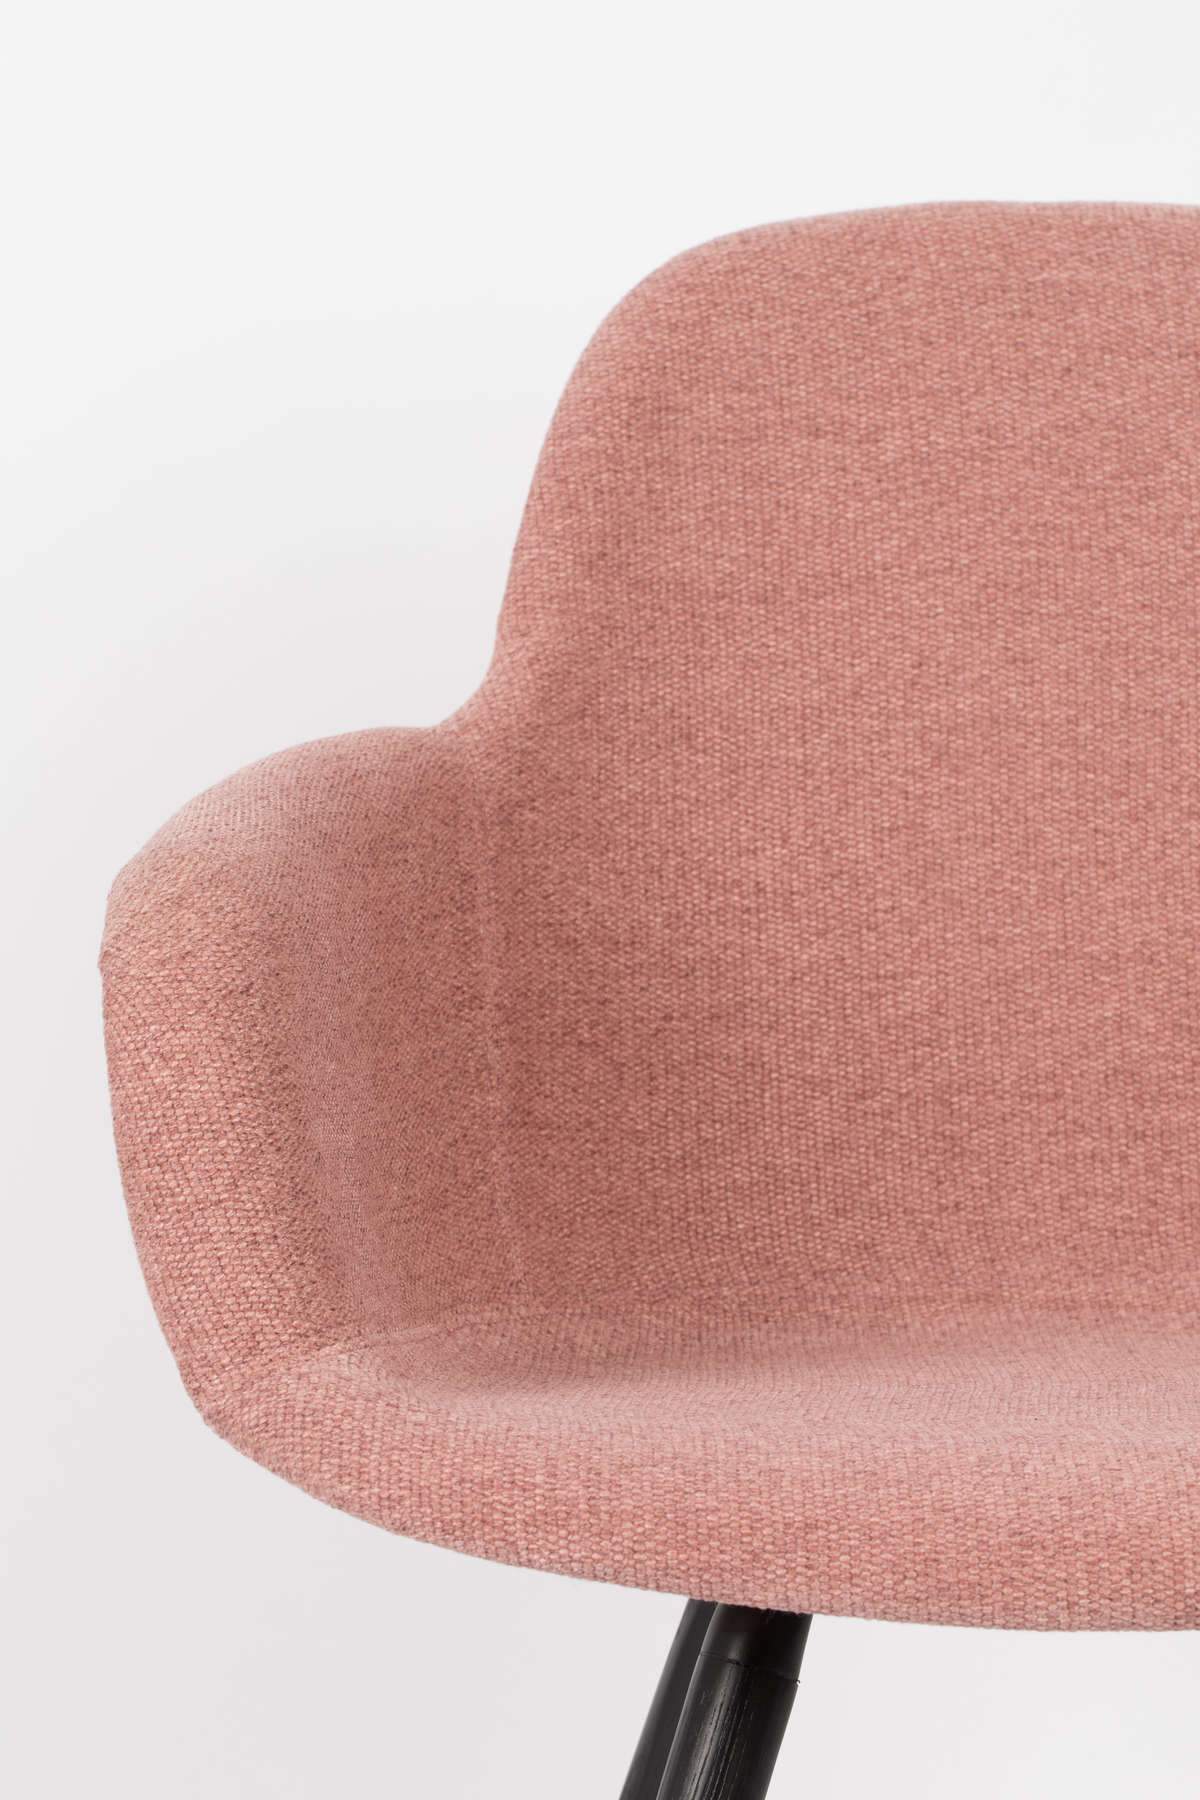 Chair with armrests ALBERT KUIP pink, Zuiver, Eye on Design